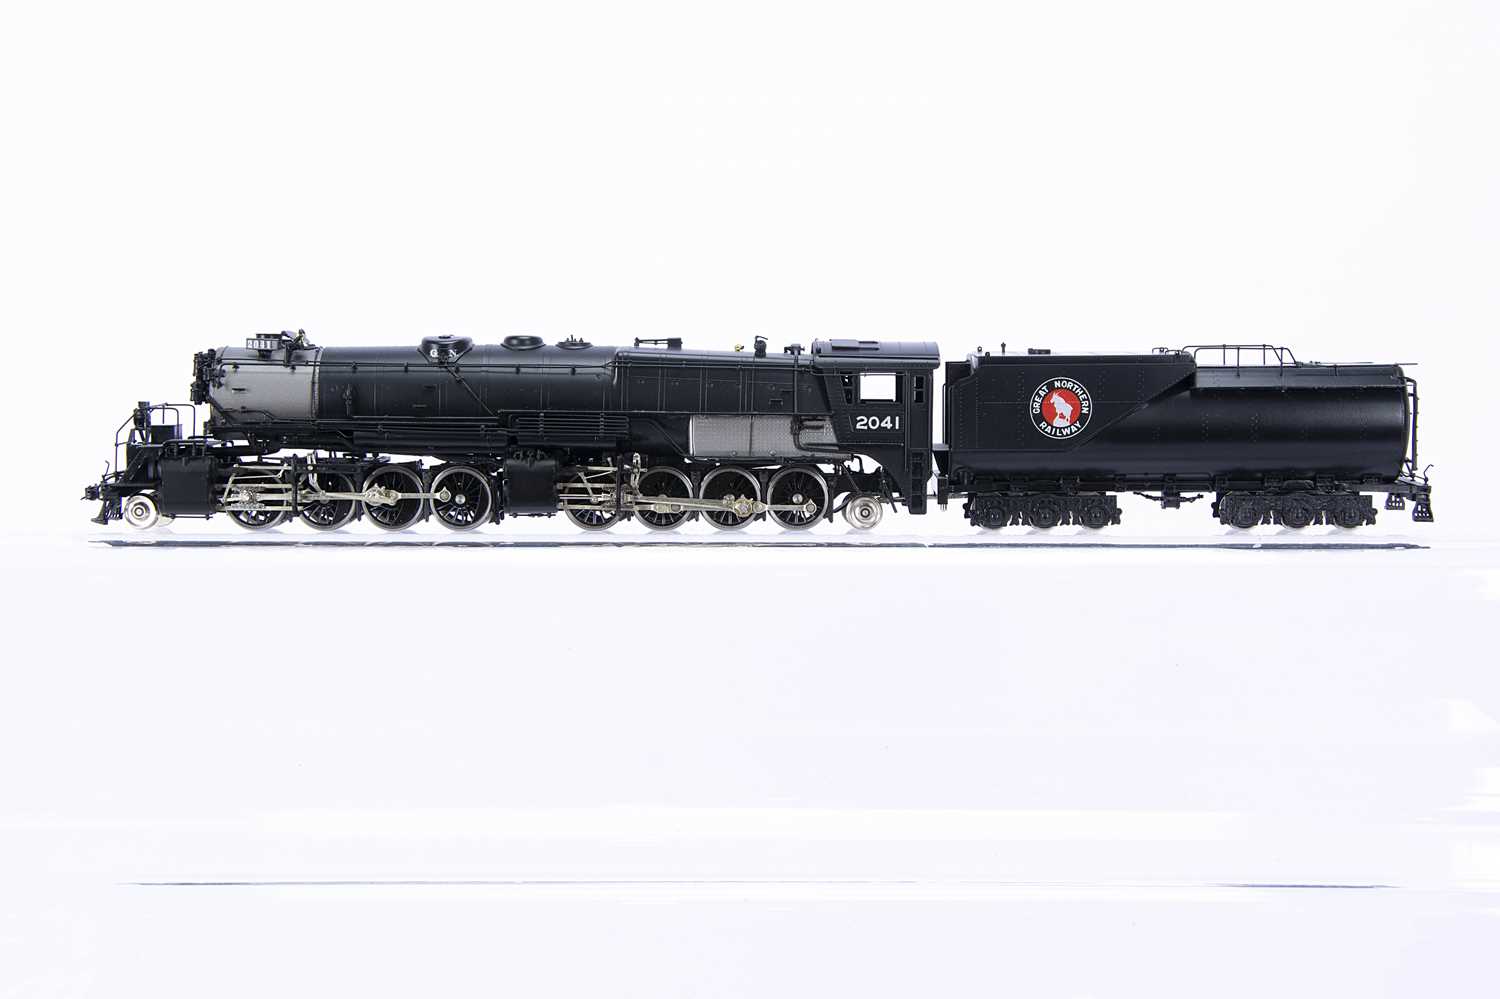 Lot 909 - Oriental Limited H0 Gauge Great Northern R-1 2-8-8-2 Closed Cab Factory Painted Black